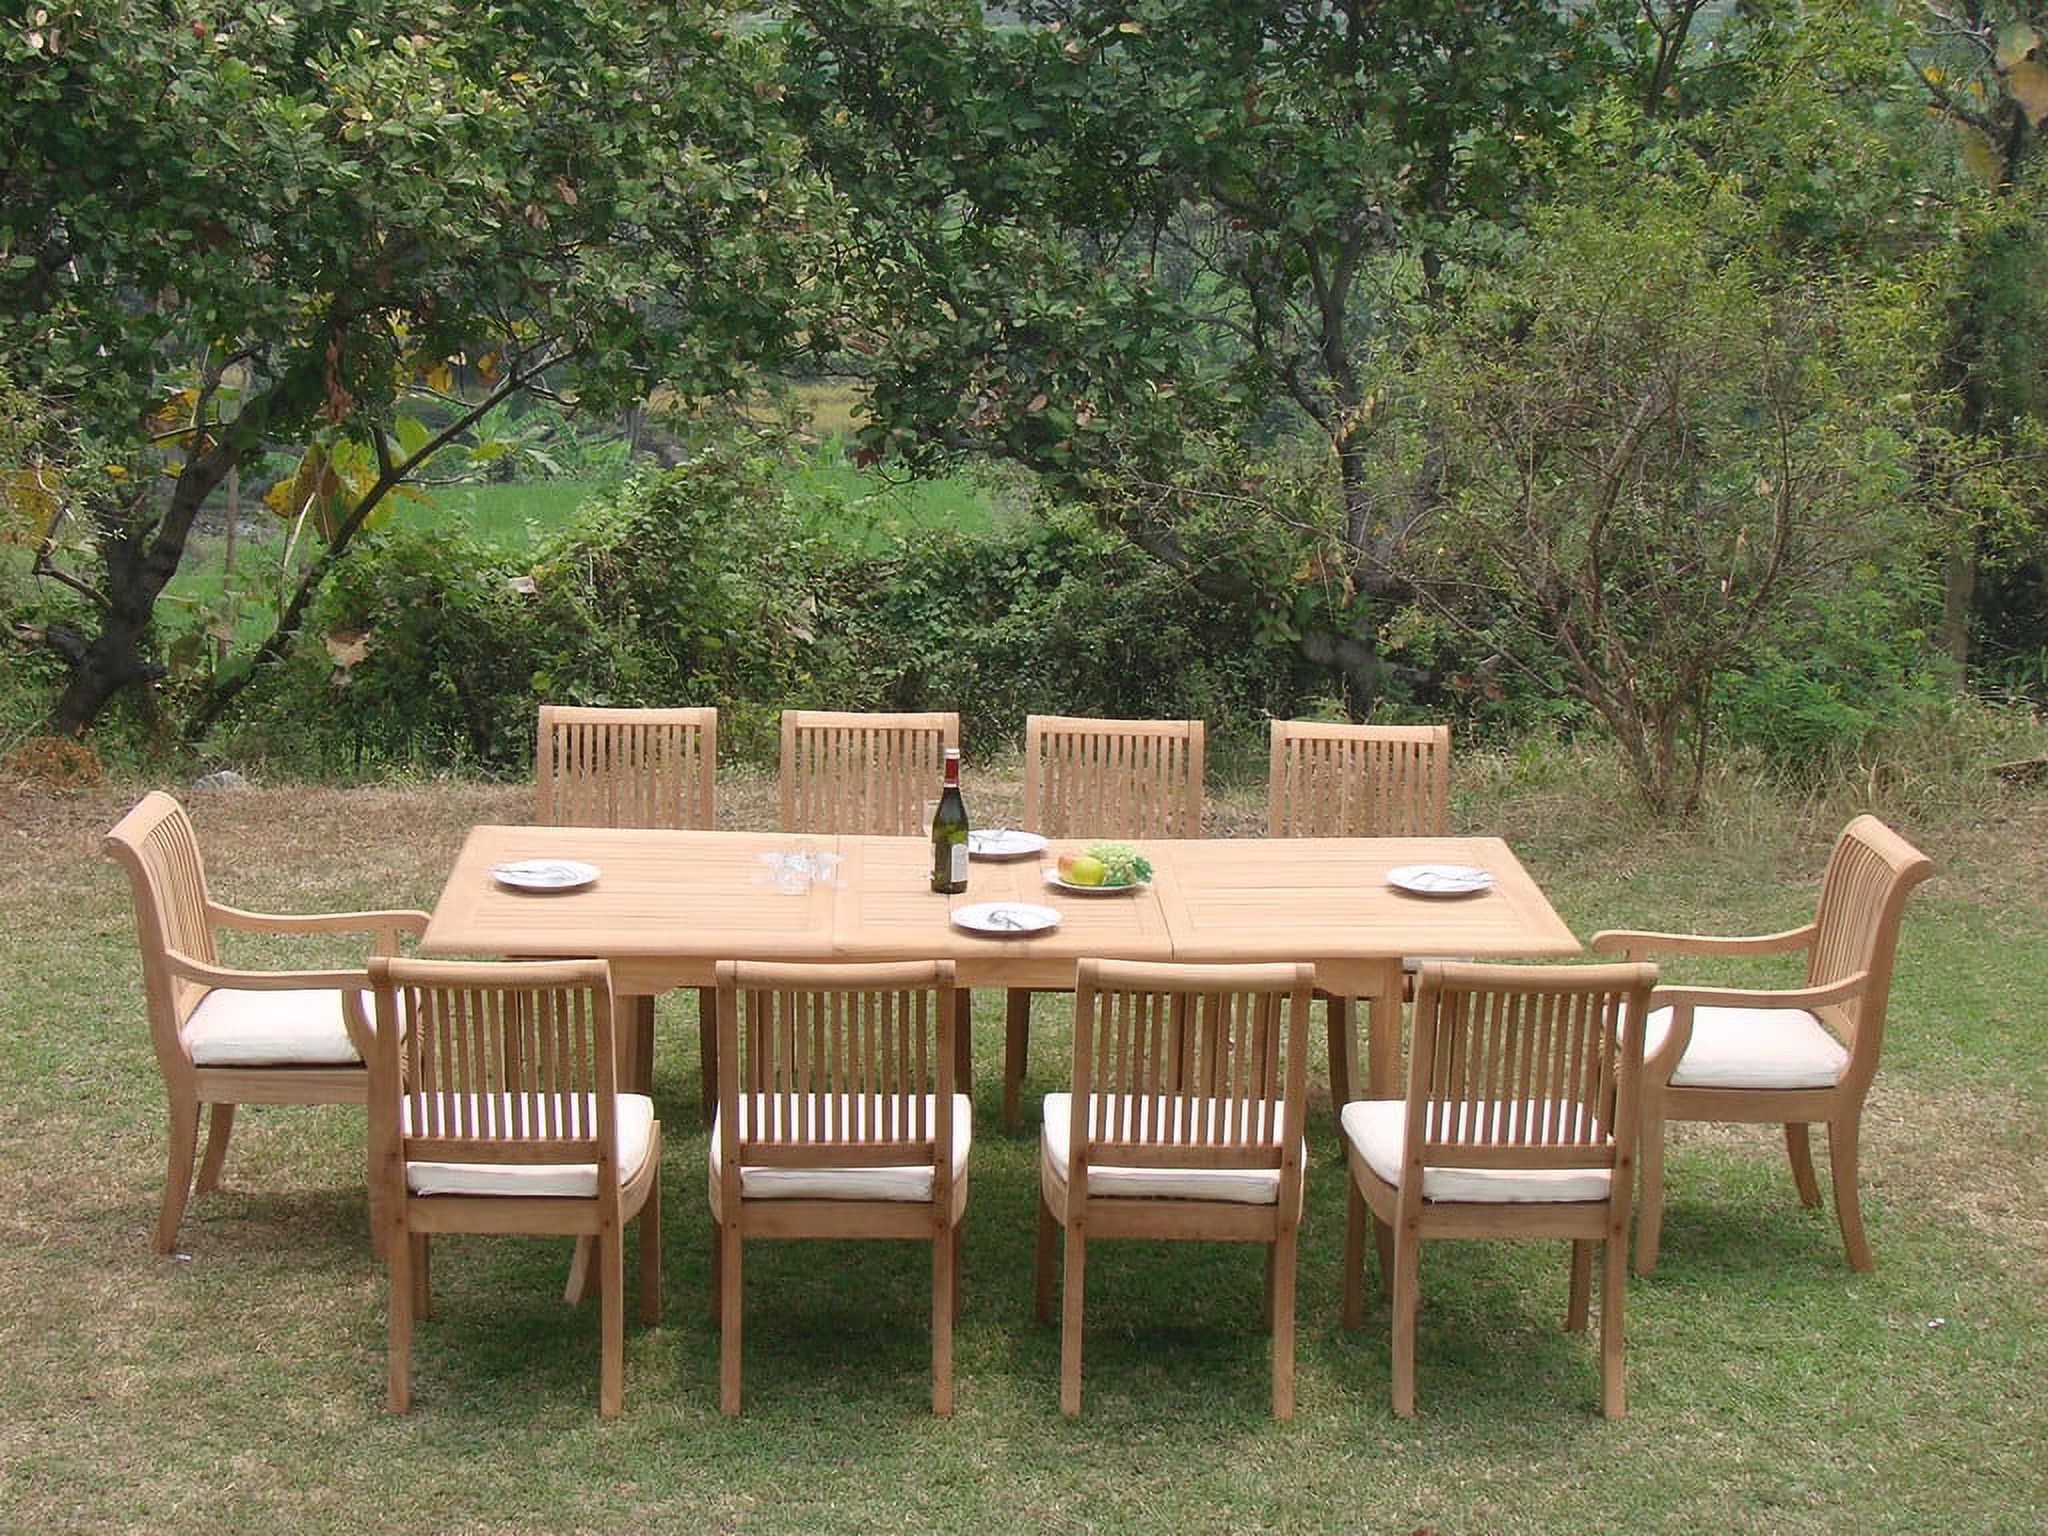 Teak Dining Set:10 Seater 11 Pc - 117" Mas Trestle Leg Double Extension Rectangle Table 8 Armless and 2 Giva Arm / Captain Chairs Outdoor Patio Grade-A Teak Wood WholesaleTeak #WMDSGVq - image 1 of 4